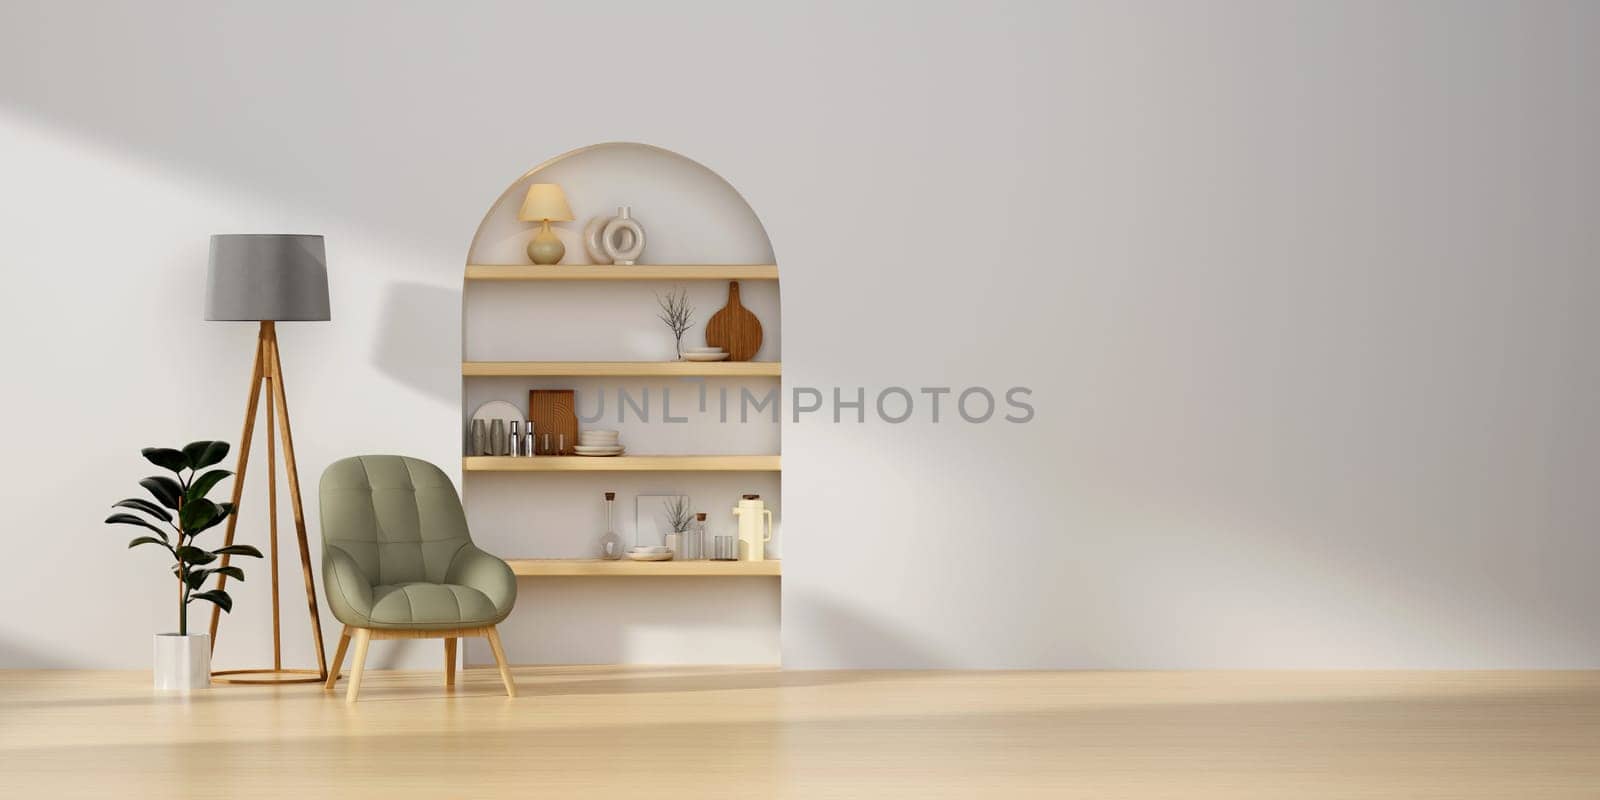 Contemporary interior living room design interior, bright walls, hardwood flooring, sofa, armchair with lamp. Concept of relax. 3d rendering.